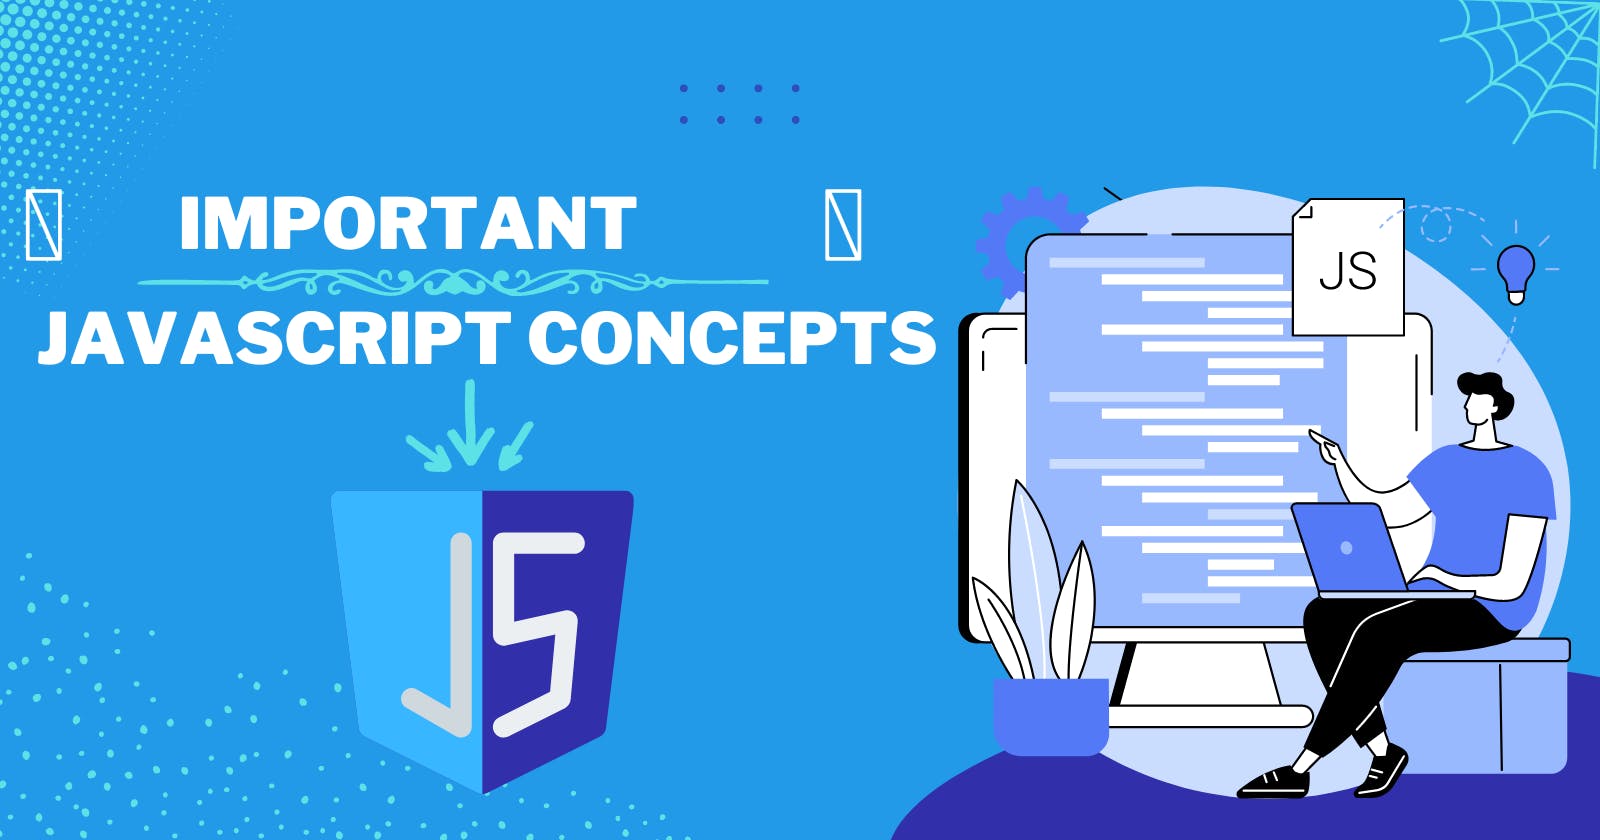 Important JavaScript concepts that every developer should know.